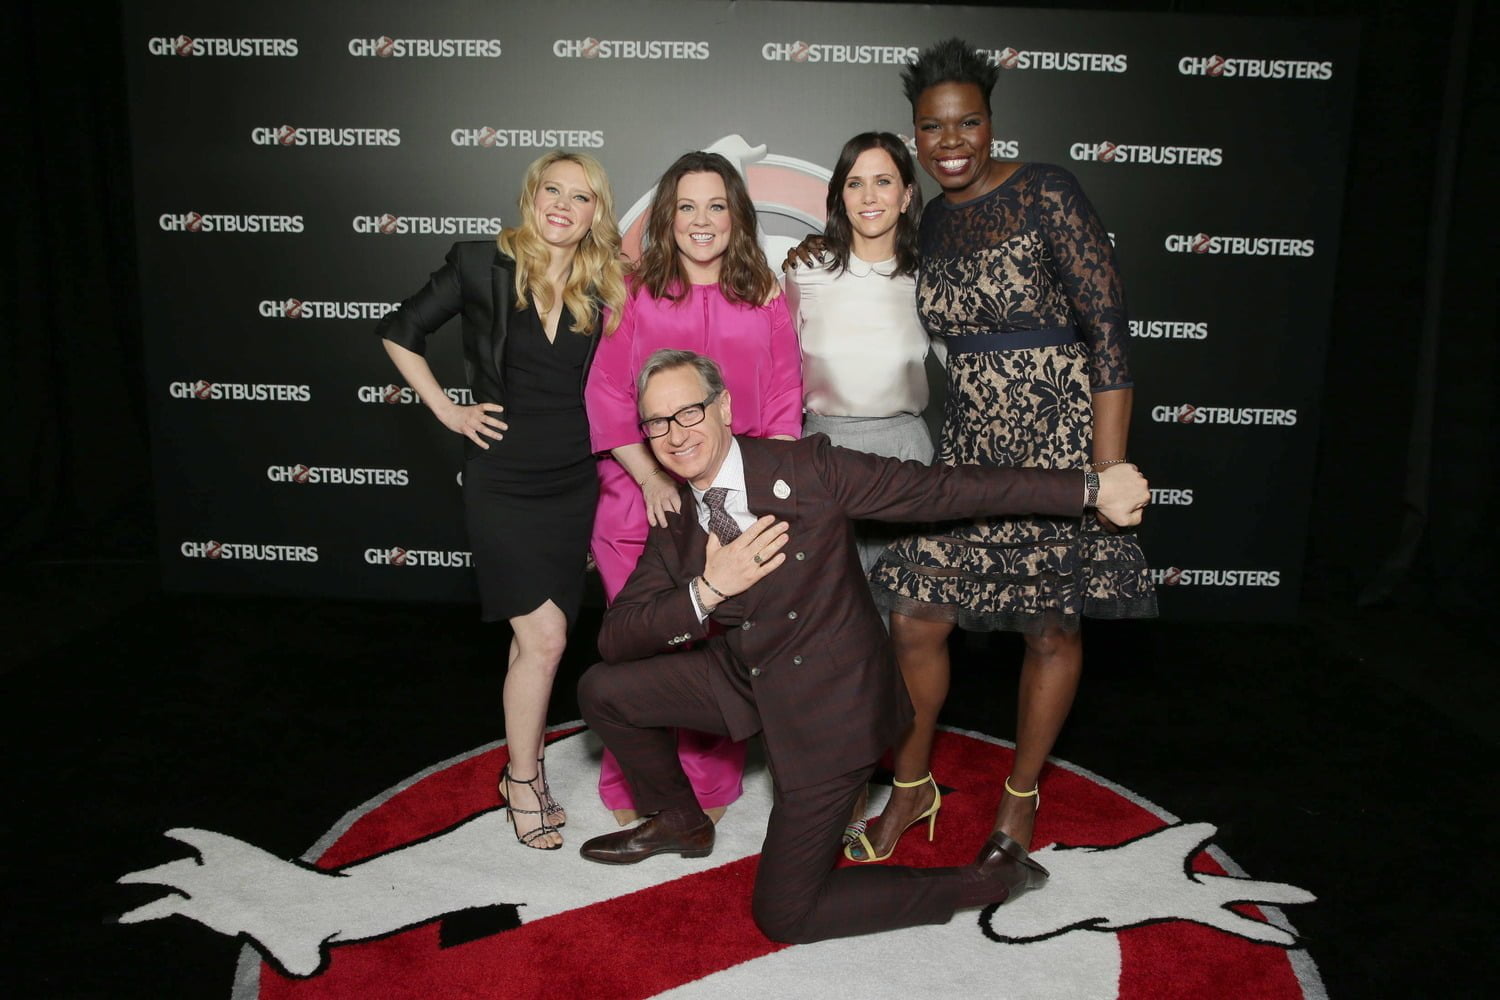 LAS VEGAS, NV - April 12th 2016 Kate McKinnon, Melissa McCarthy, Director/Writer Paul Feig, Kristen Wiig and Leslie Jones seen at Columbia Pictures "Ghostbusters" photo call at An Evening with Sony Pictures Entertainment: Celebrating The Summer of 2016 and Beyond at 2016 CinemaCon